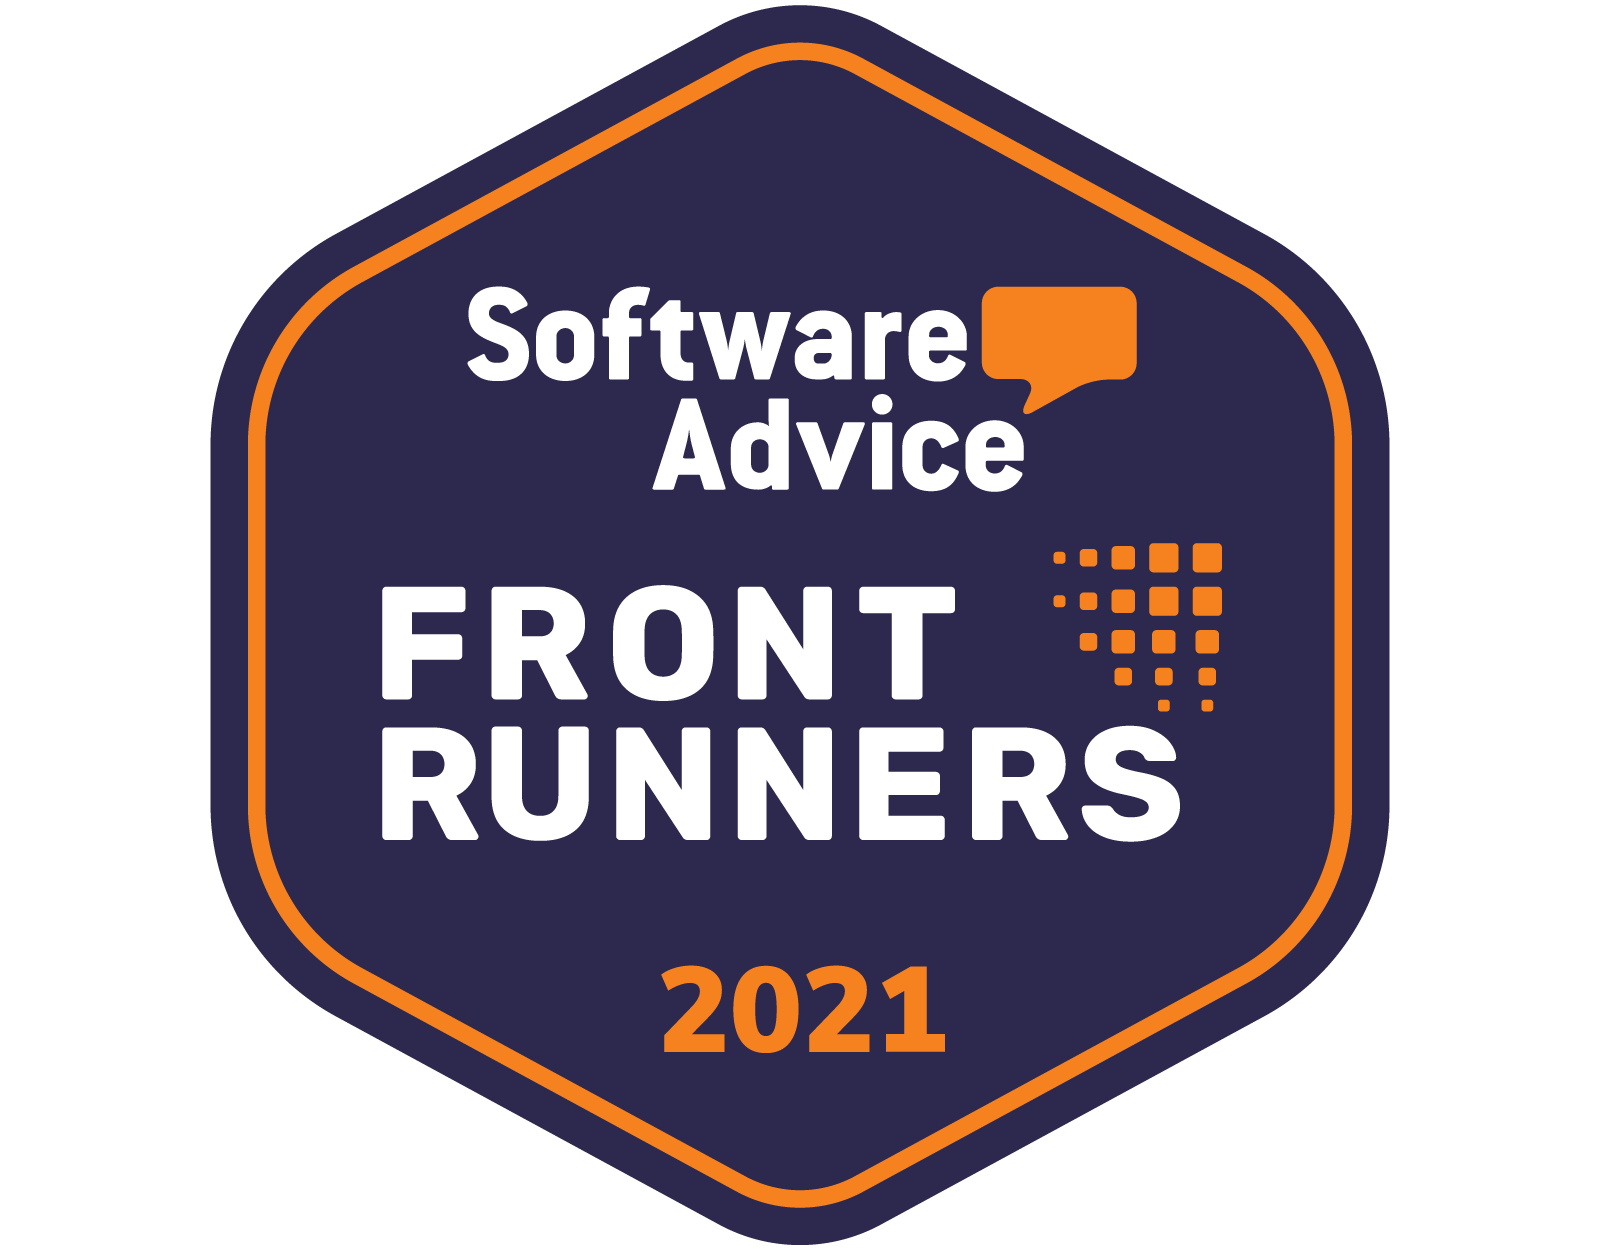 Patriot Accounting named front runner 2020 by Software Advice